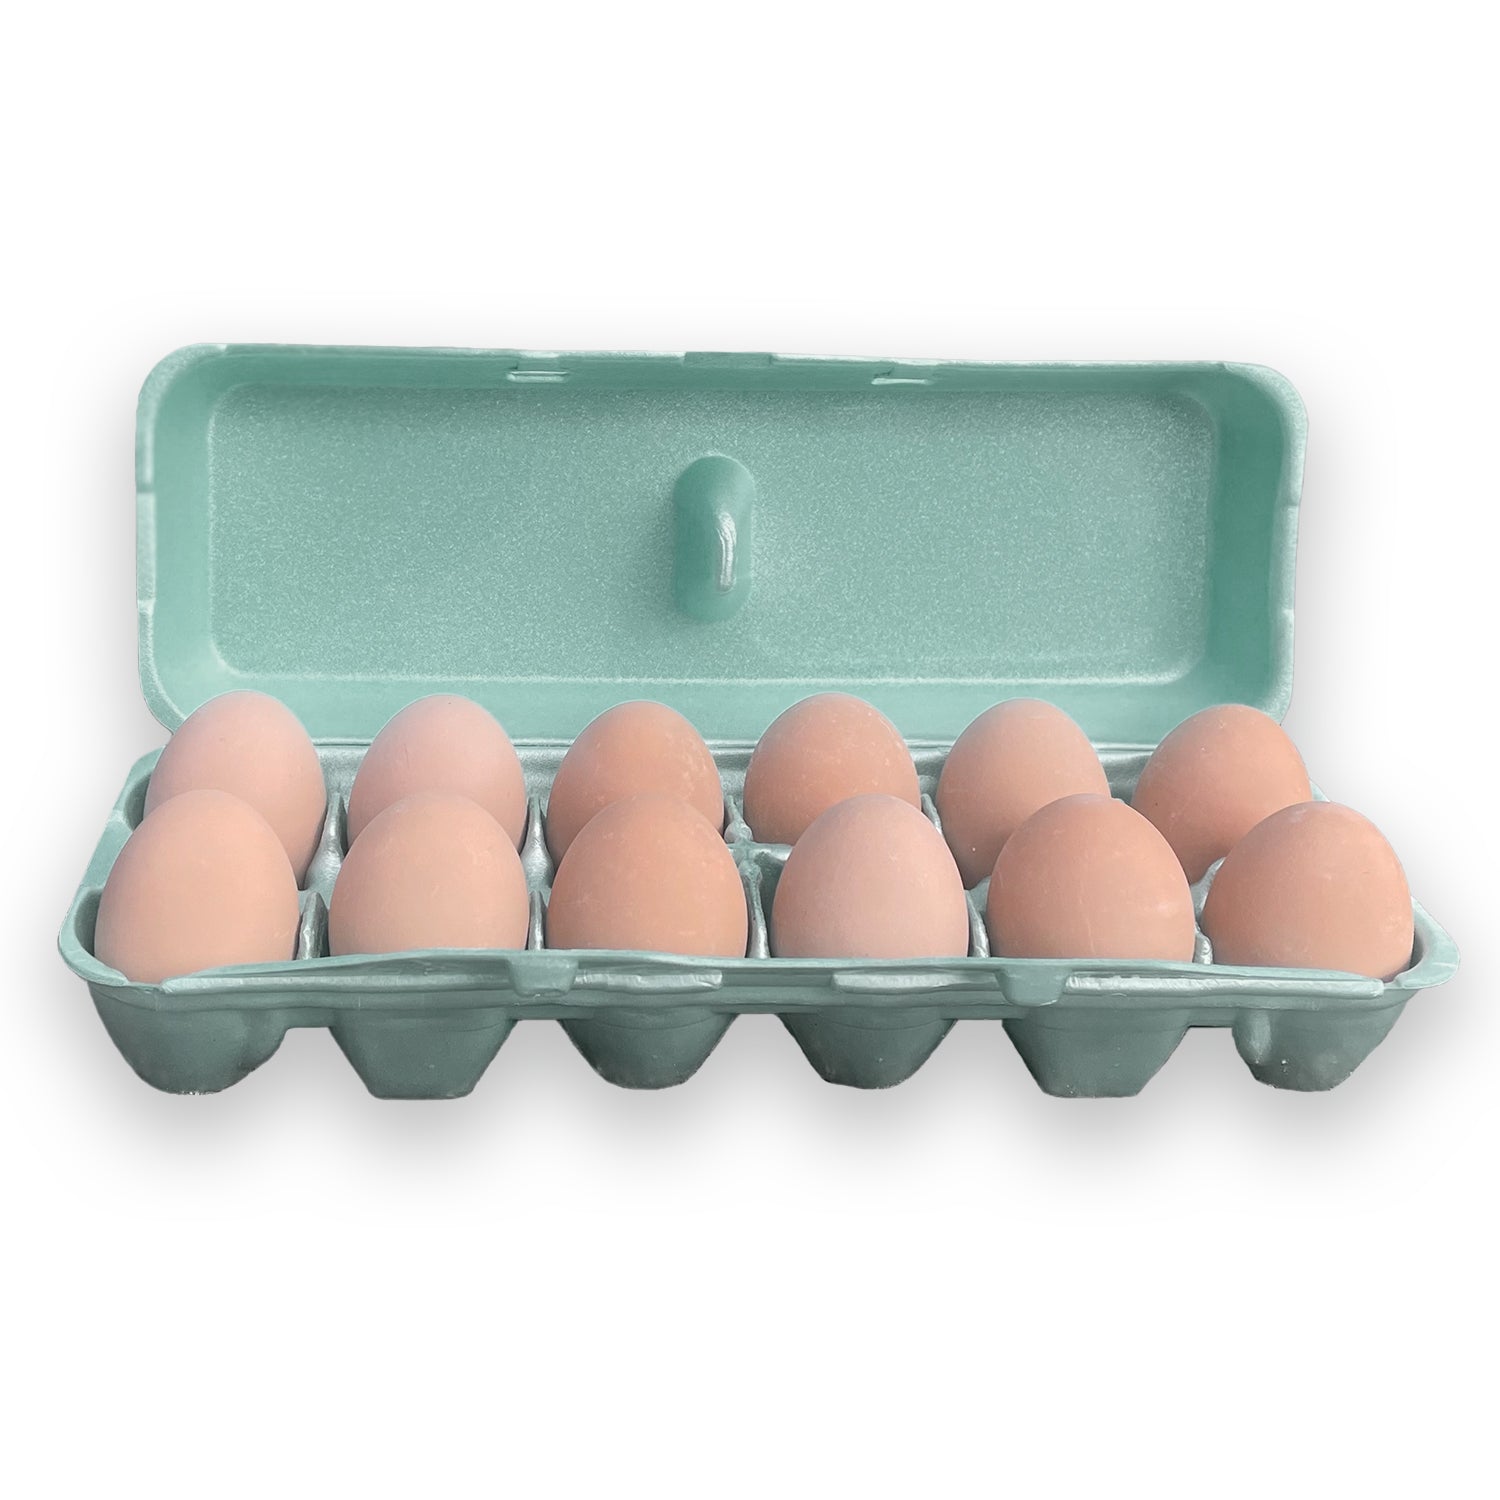 Grade A Large Printed Egg Cartons, 100 Pack by Stromberg's